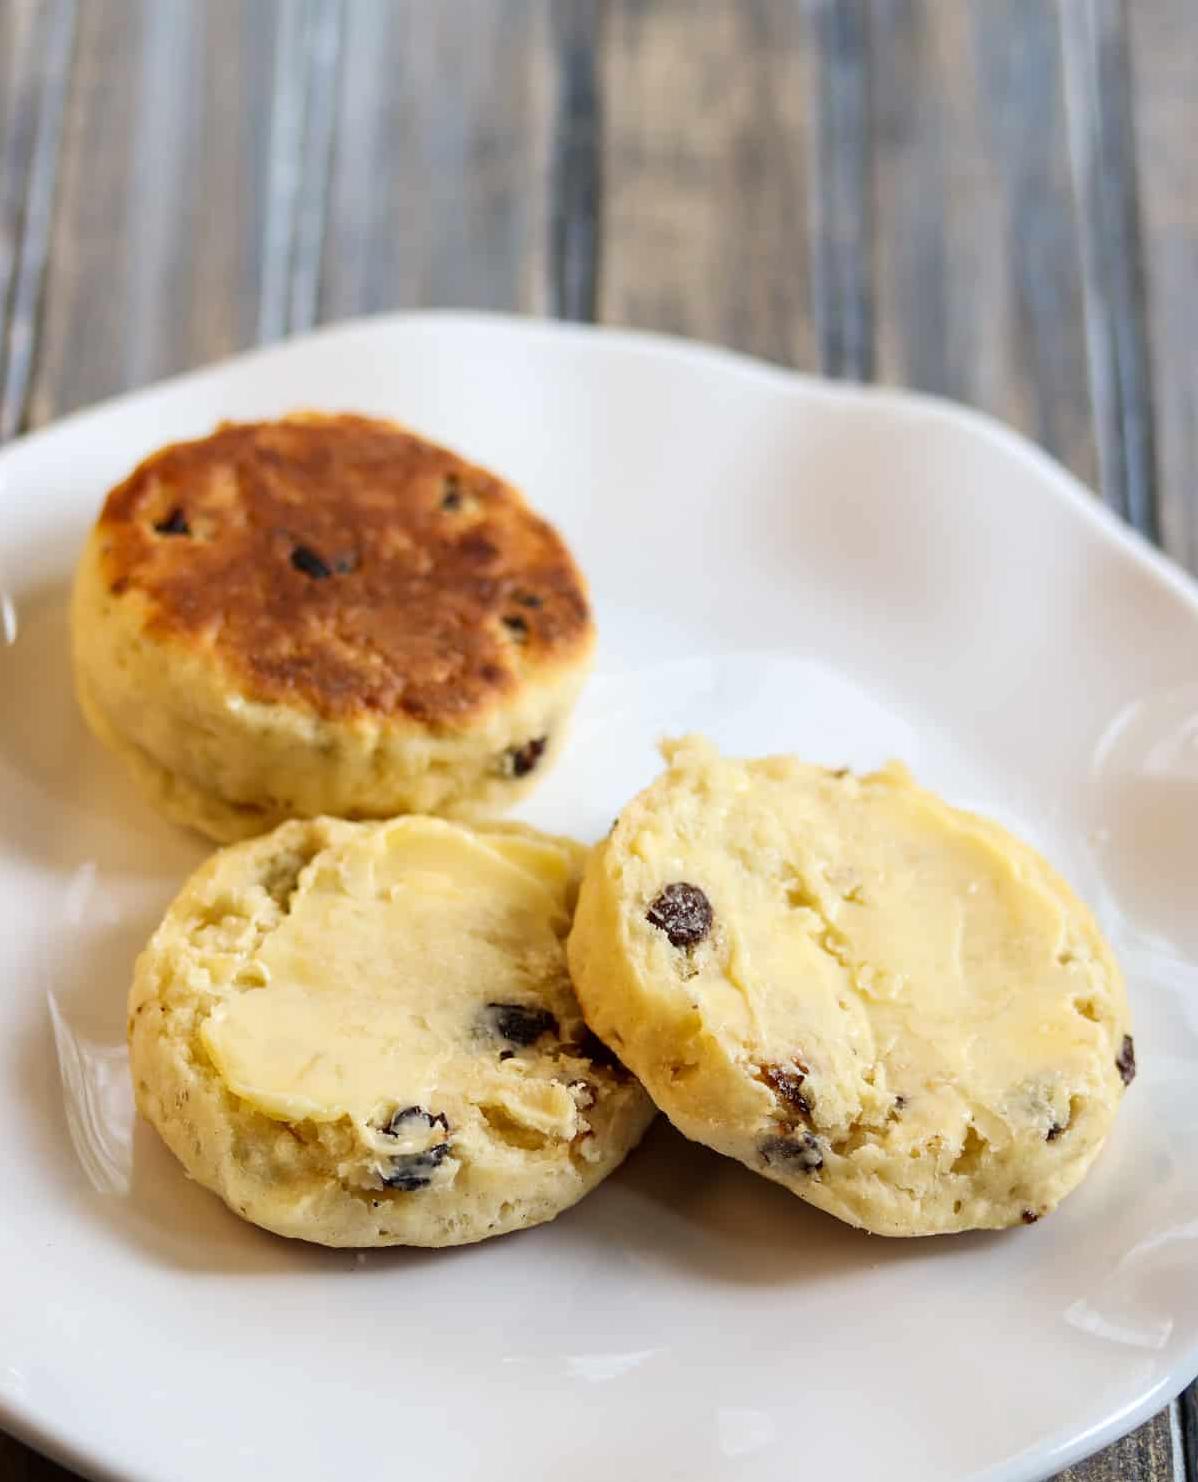  Making your kitchen smell like a bakery with these raisin scones.